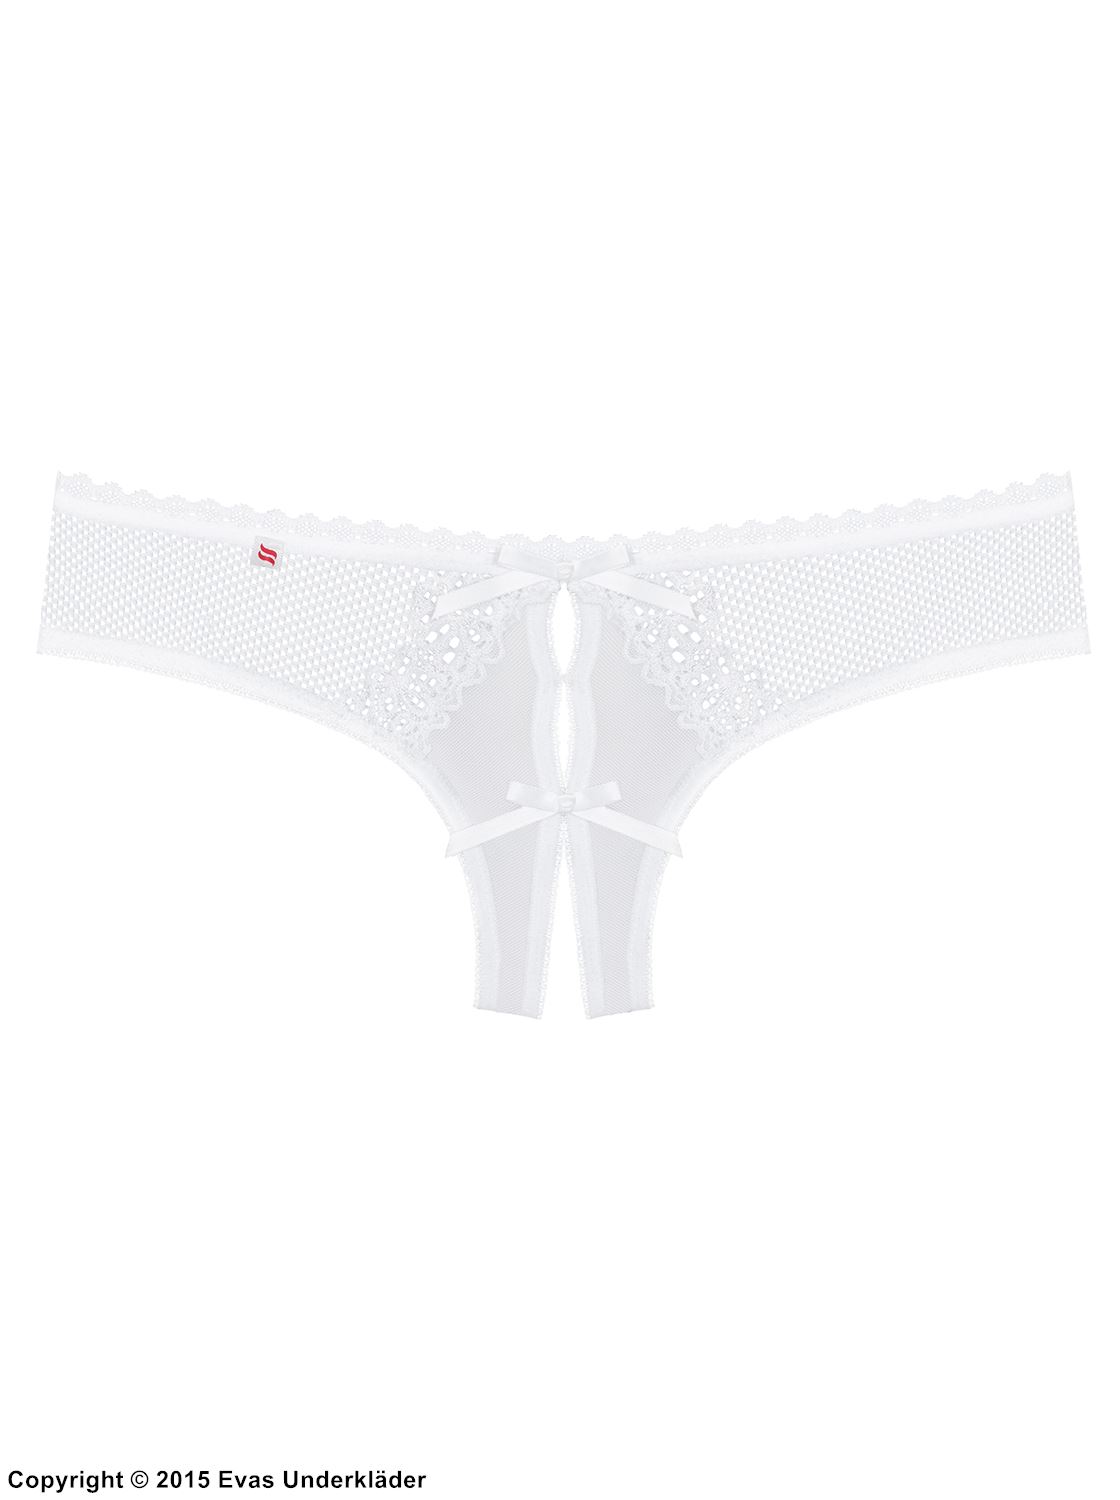 Romantic thong, open crotch, openwork lace